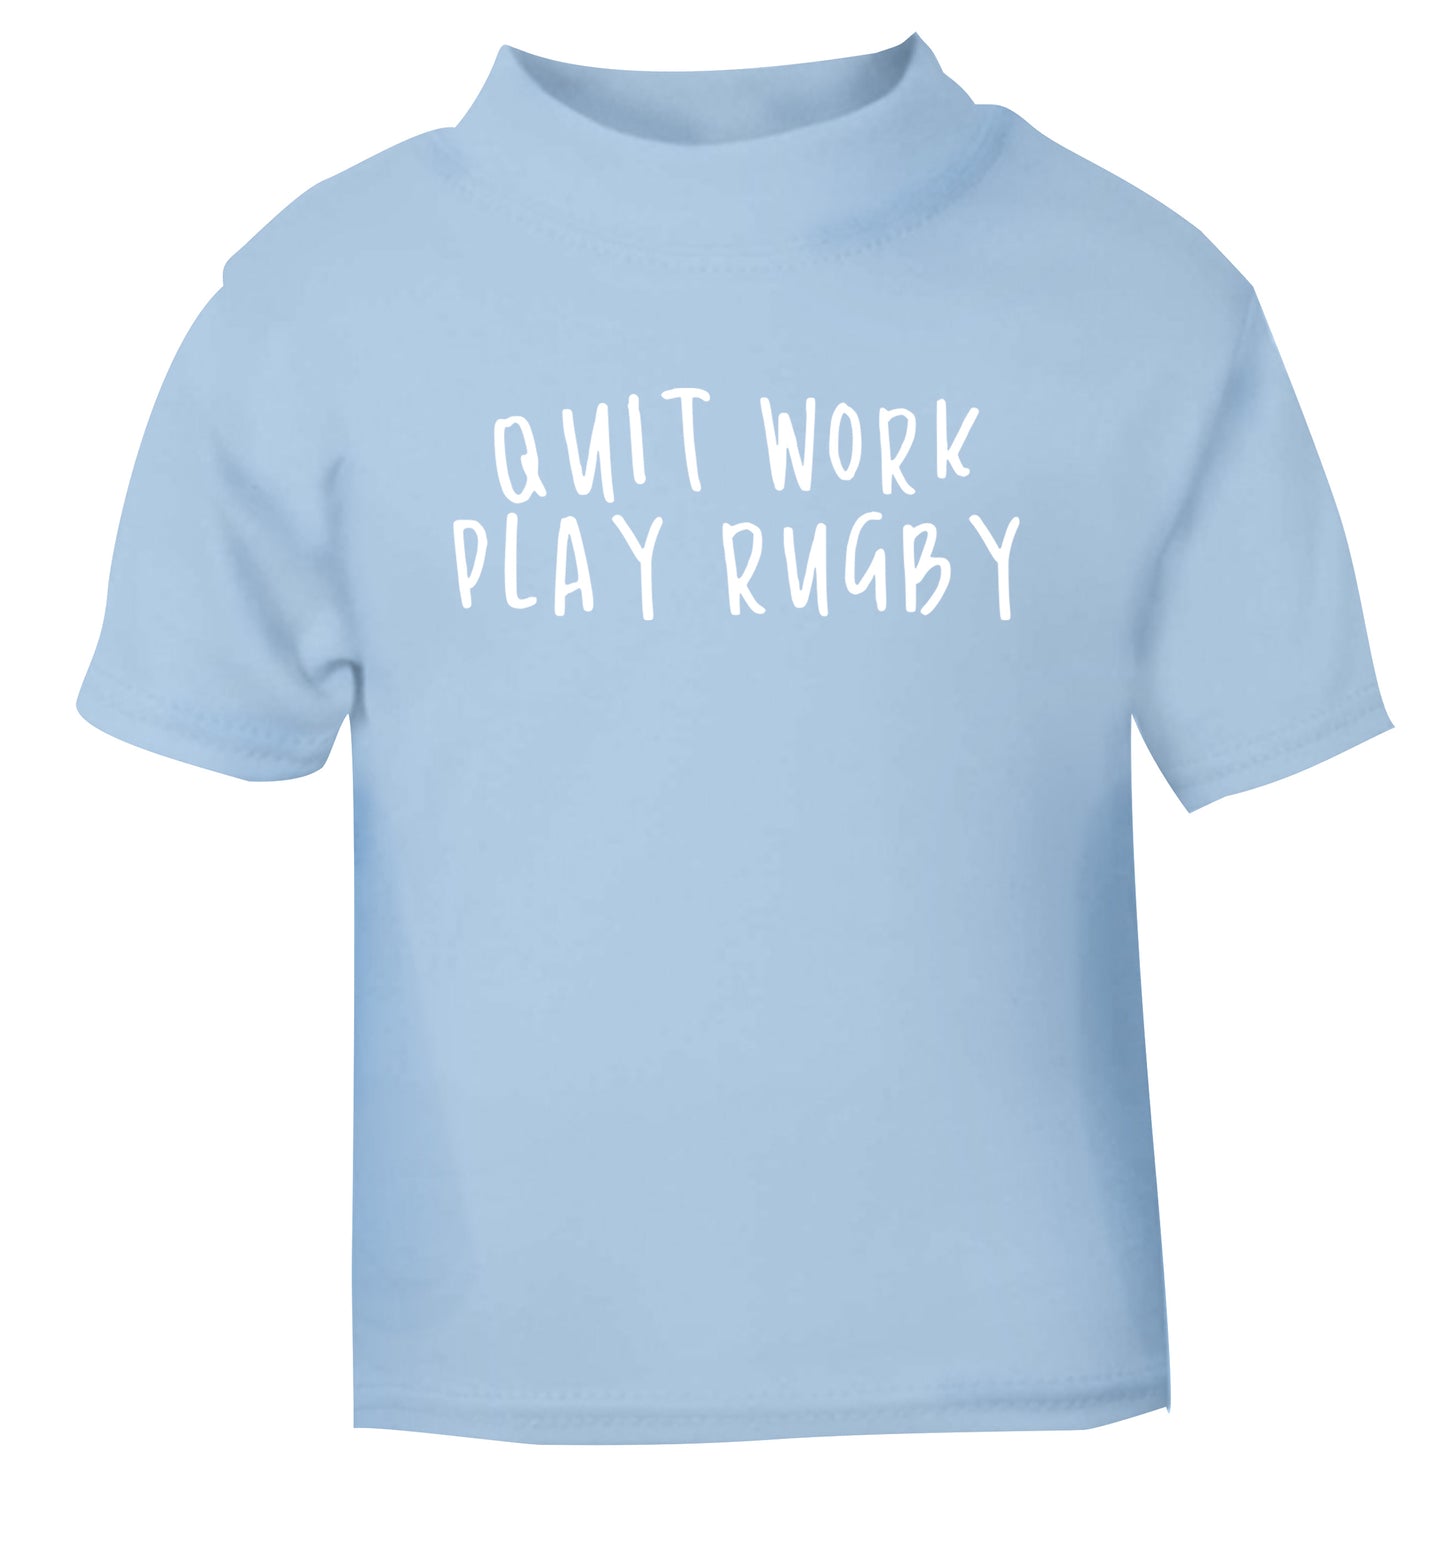 Quit work play rugby light blue Baby Toddler Tshirt 2 Years